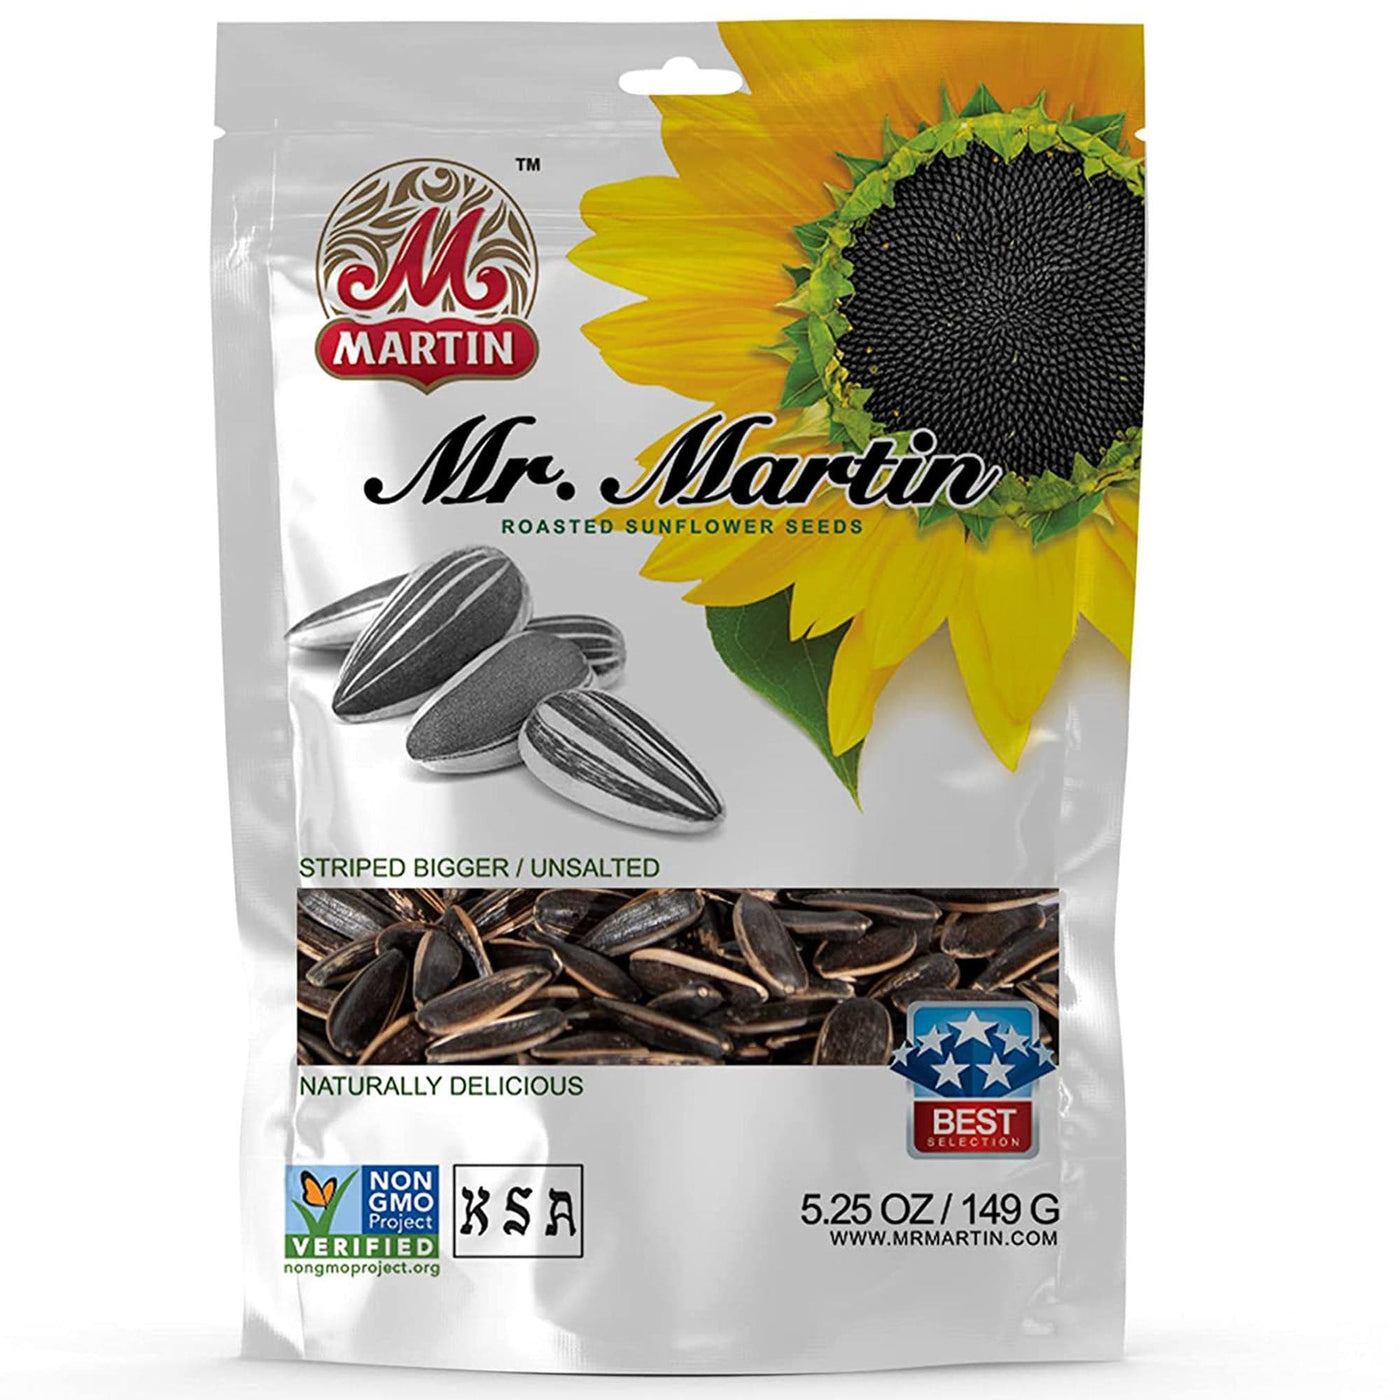 12 Bags of Mr. Martin Freshly Roasted Unsalted Sunflower Seeds.